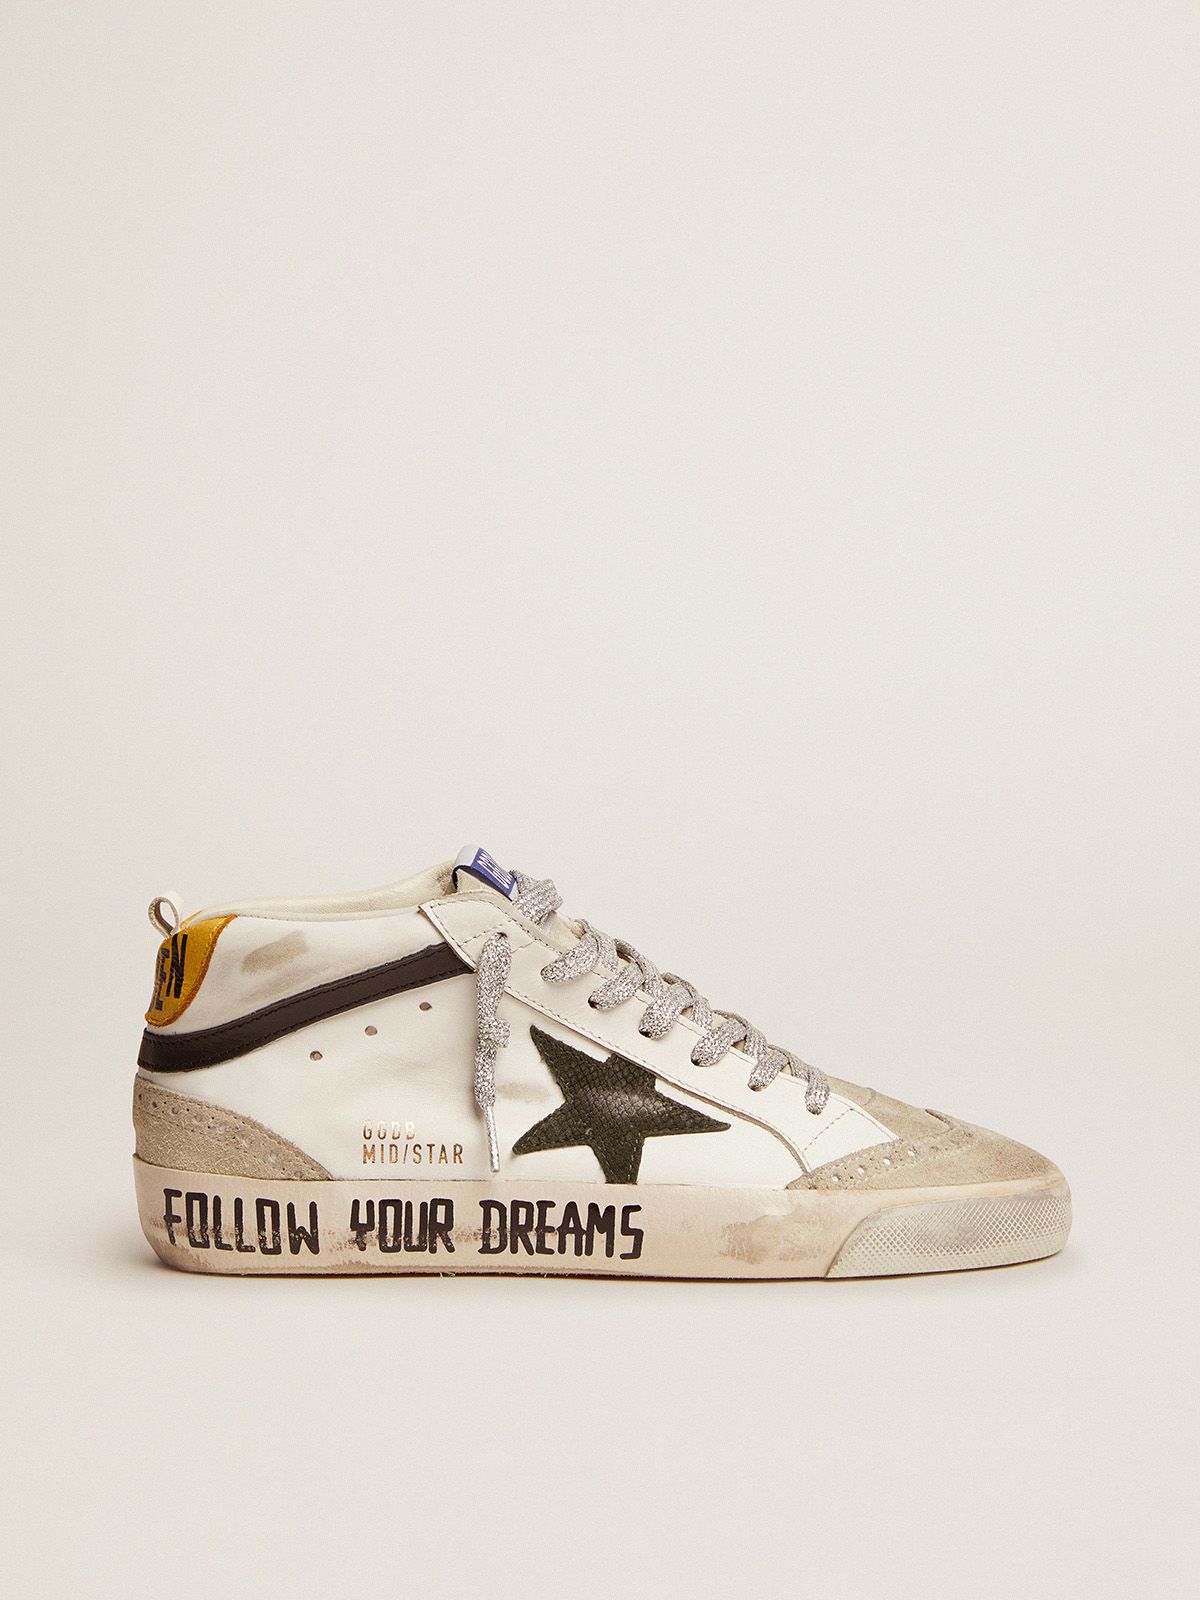 Golden Goose Sneakers Uomo Mid Star LTD sneakers with leather and suede upper and snake-print leather star